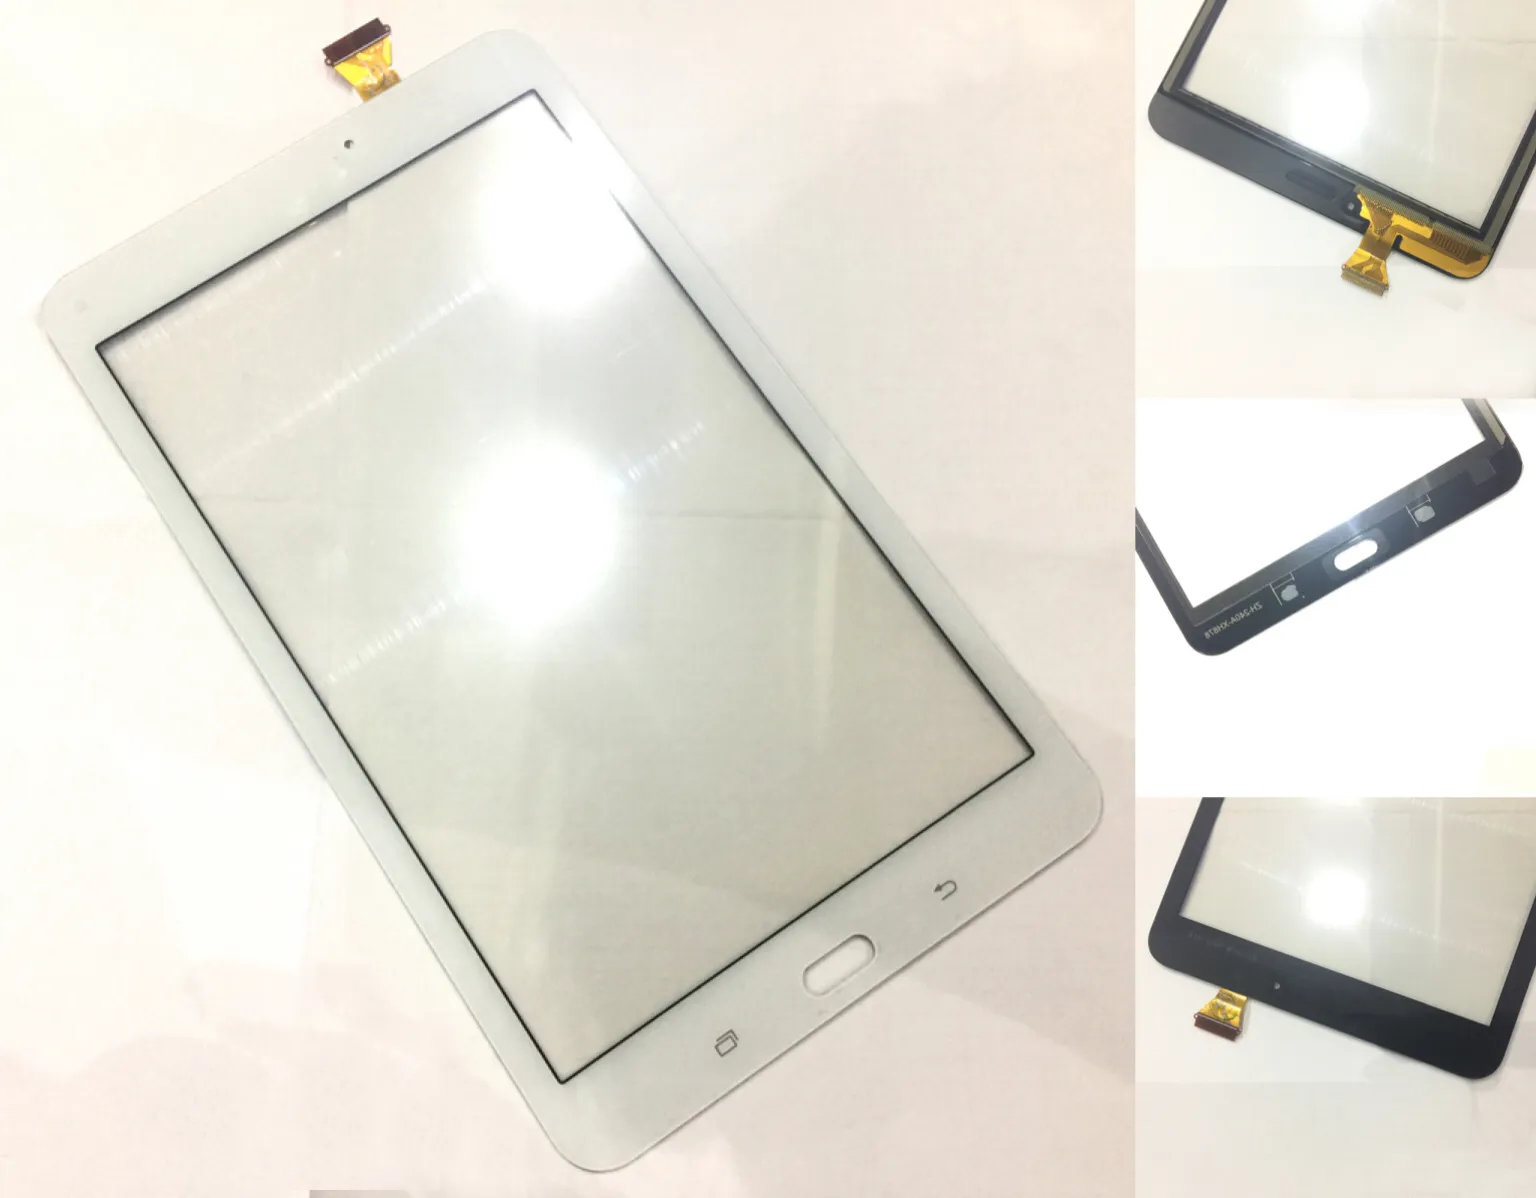 for Samsung Galaxy Tab E 8.0 T377 T375 Digitizer with Preattached Adhesive No Speaker Hole Black White